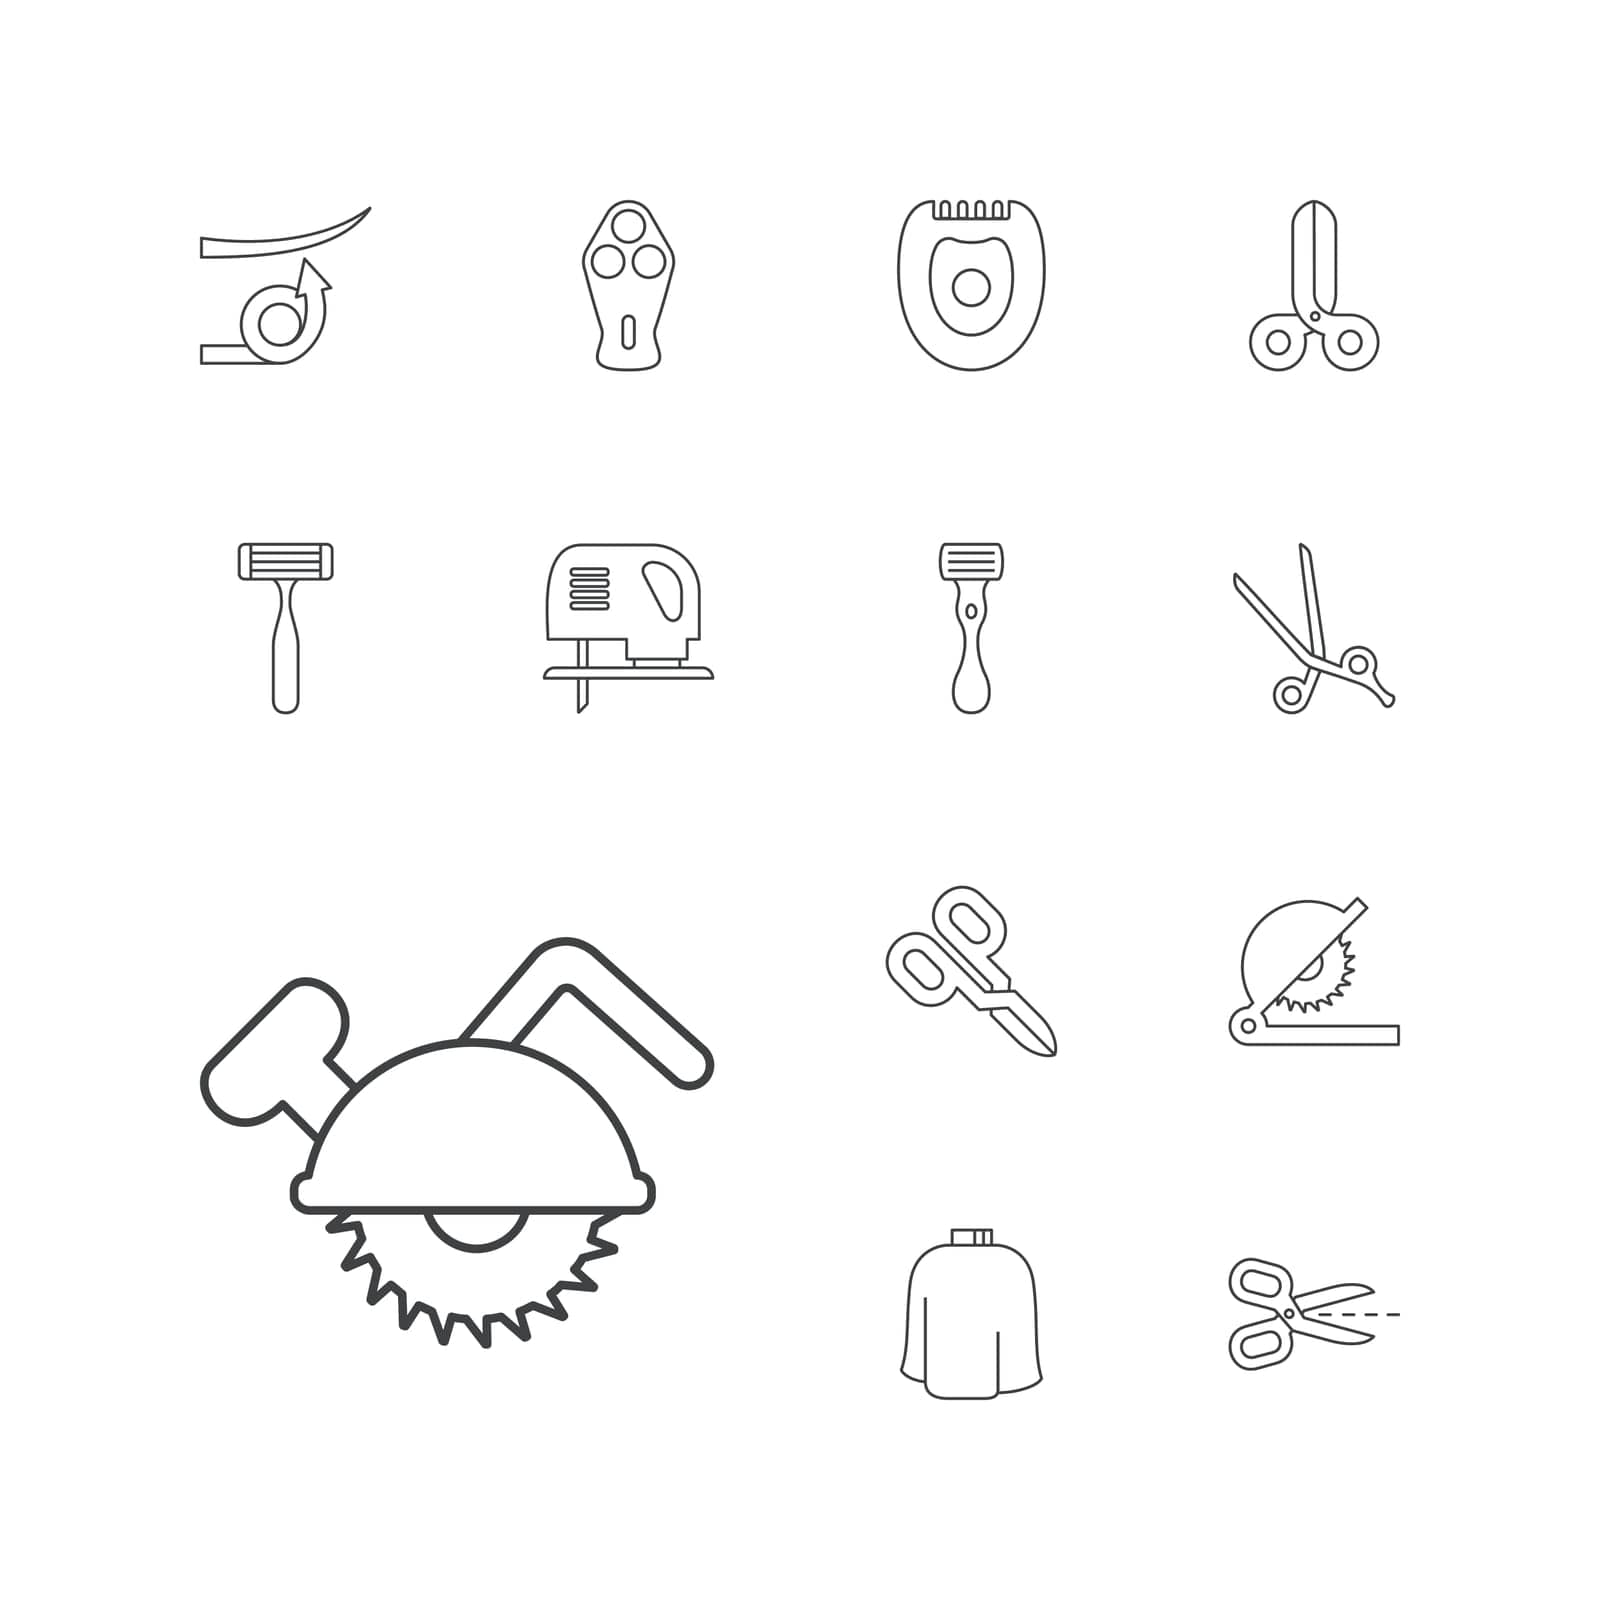 symbol,steel,cut,beauty,icon,sign,isolated,cutter,blade,hair,hairdresser,flat,design,peignoir,vector,barber,element,set,shape,electric,black,saw,circular,tool,sharp,scissors,straight,background,style,razor,illustration,manicure,object,care by ogqcorp